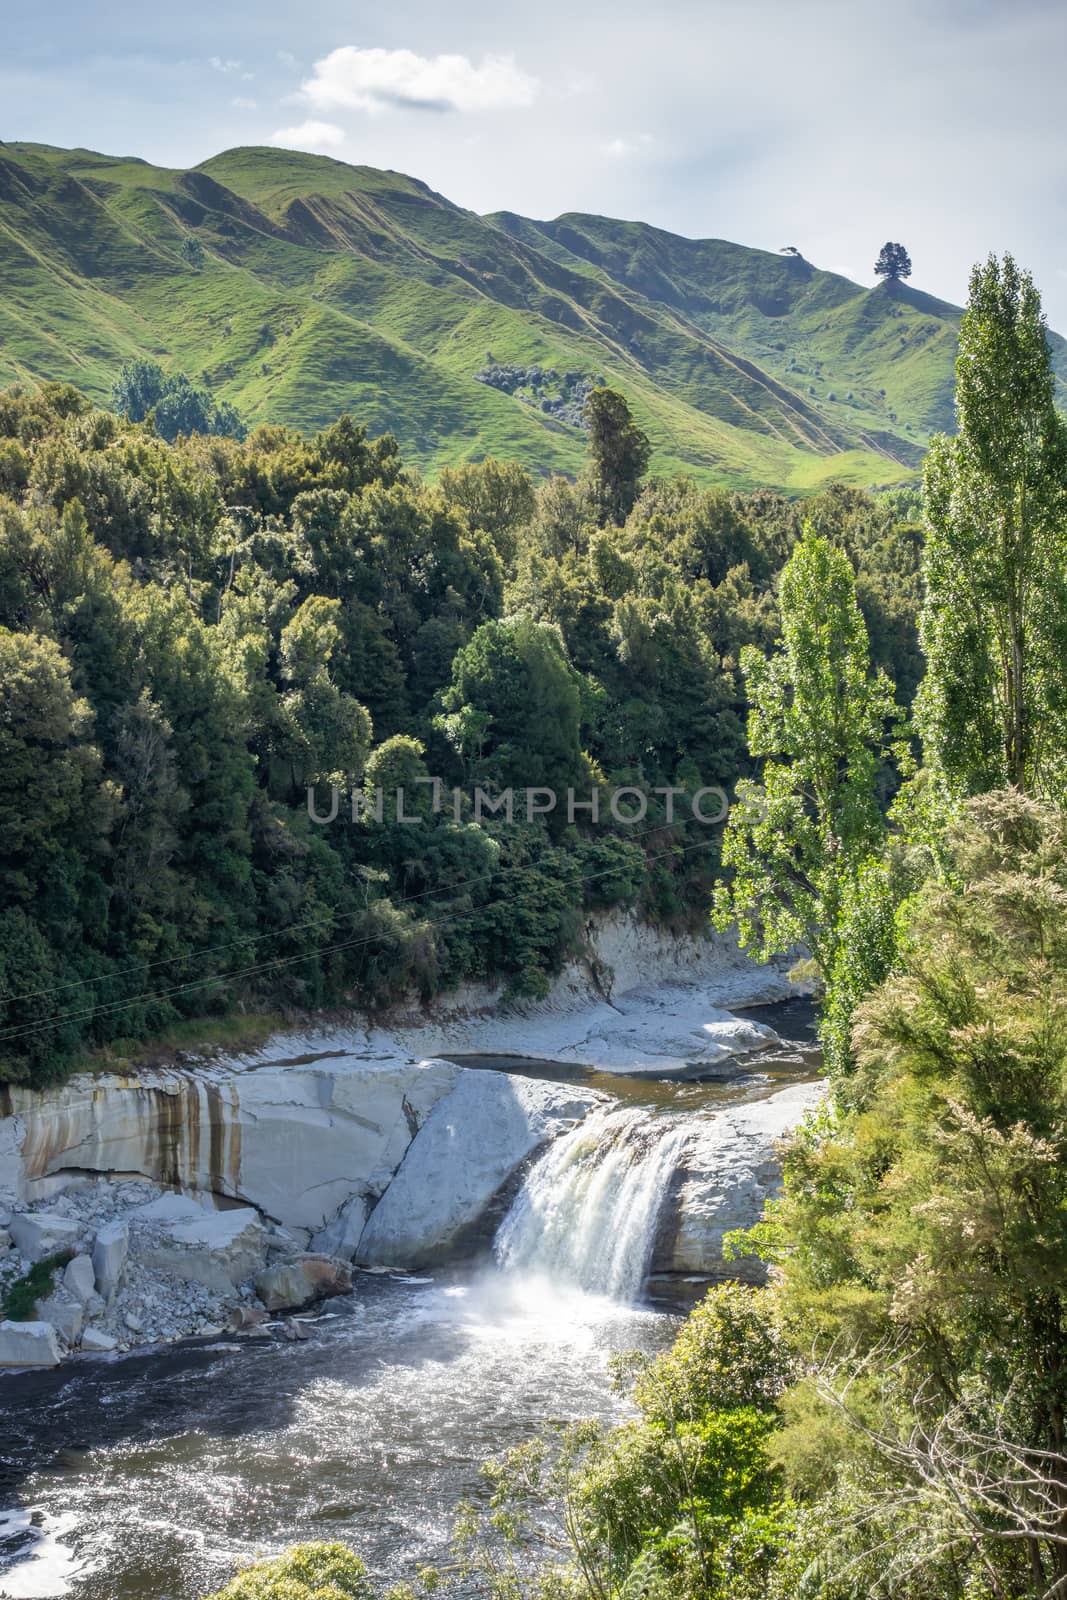 An image of a small waterfall in northern New Zealand